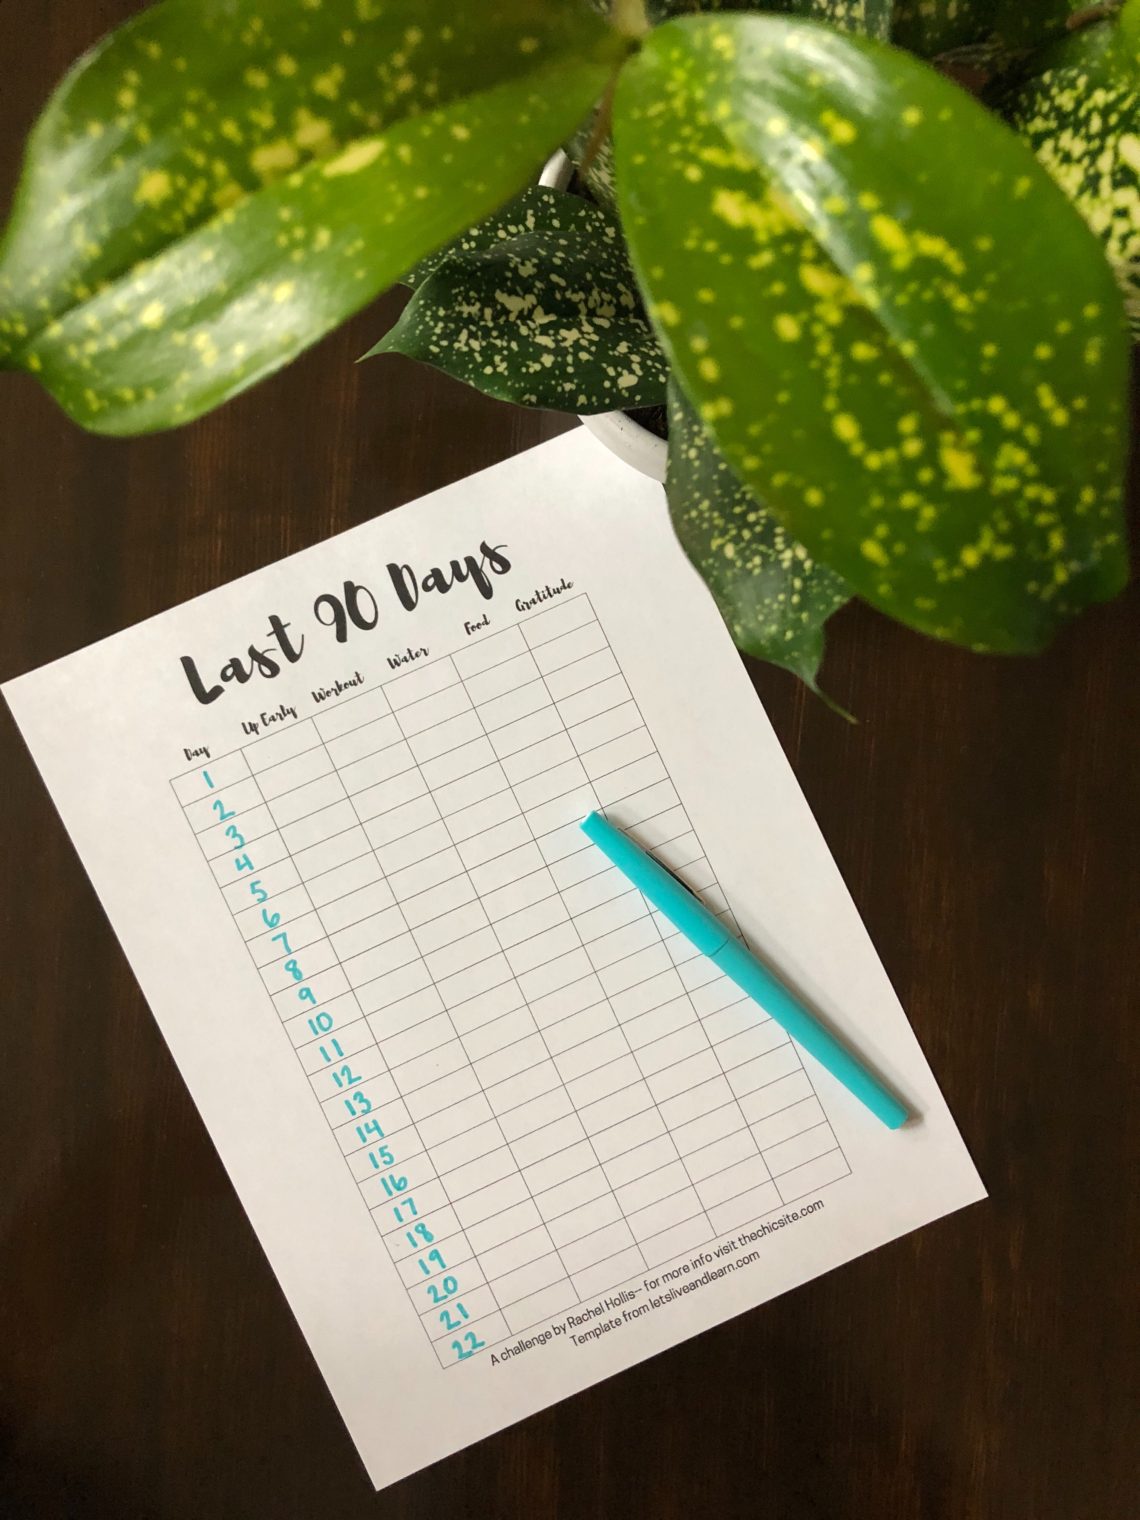 Last 90 Days Challenge Printable Let s Live And Learn